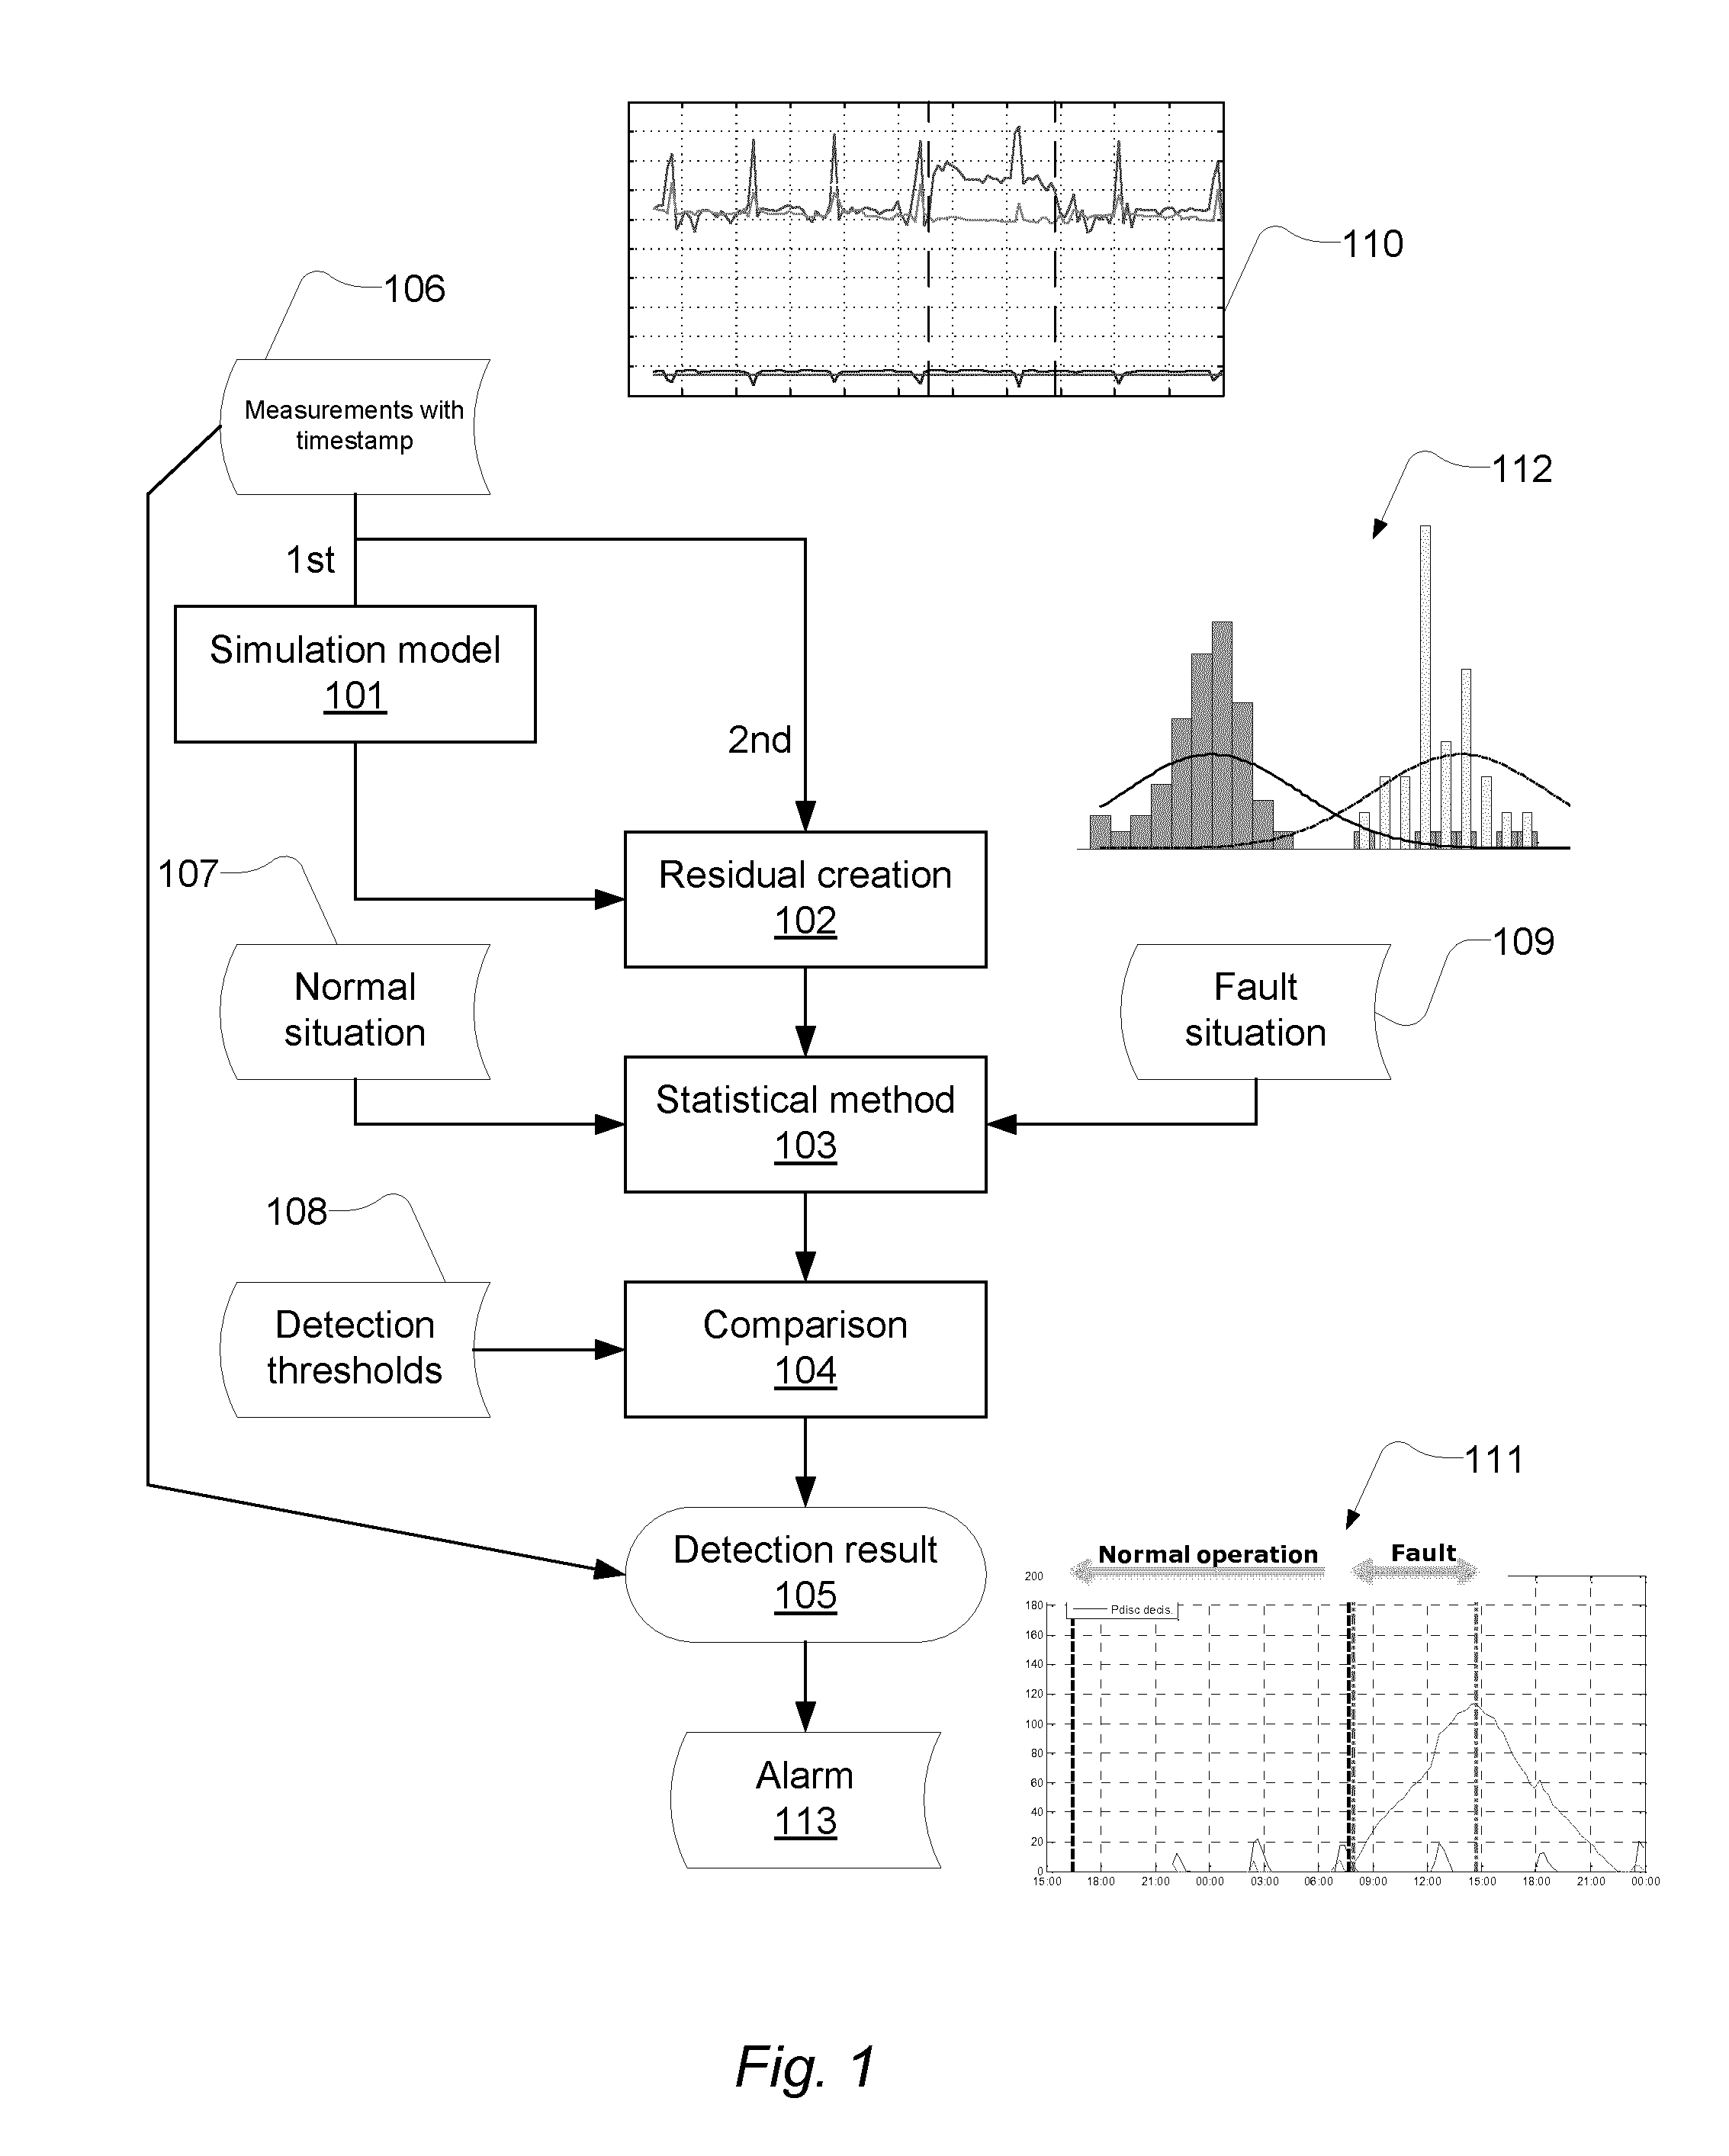 Computer-implemented method of monitoring the operation of a cargo shipping reefer container